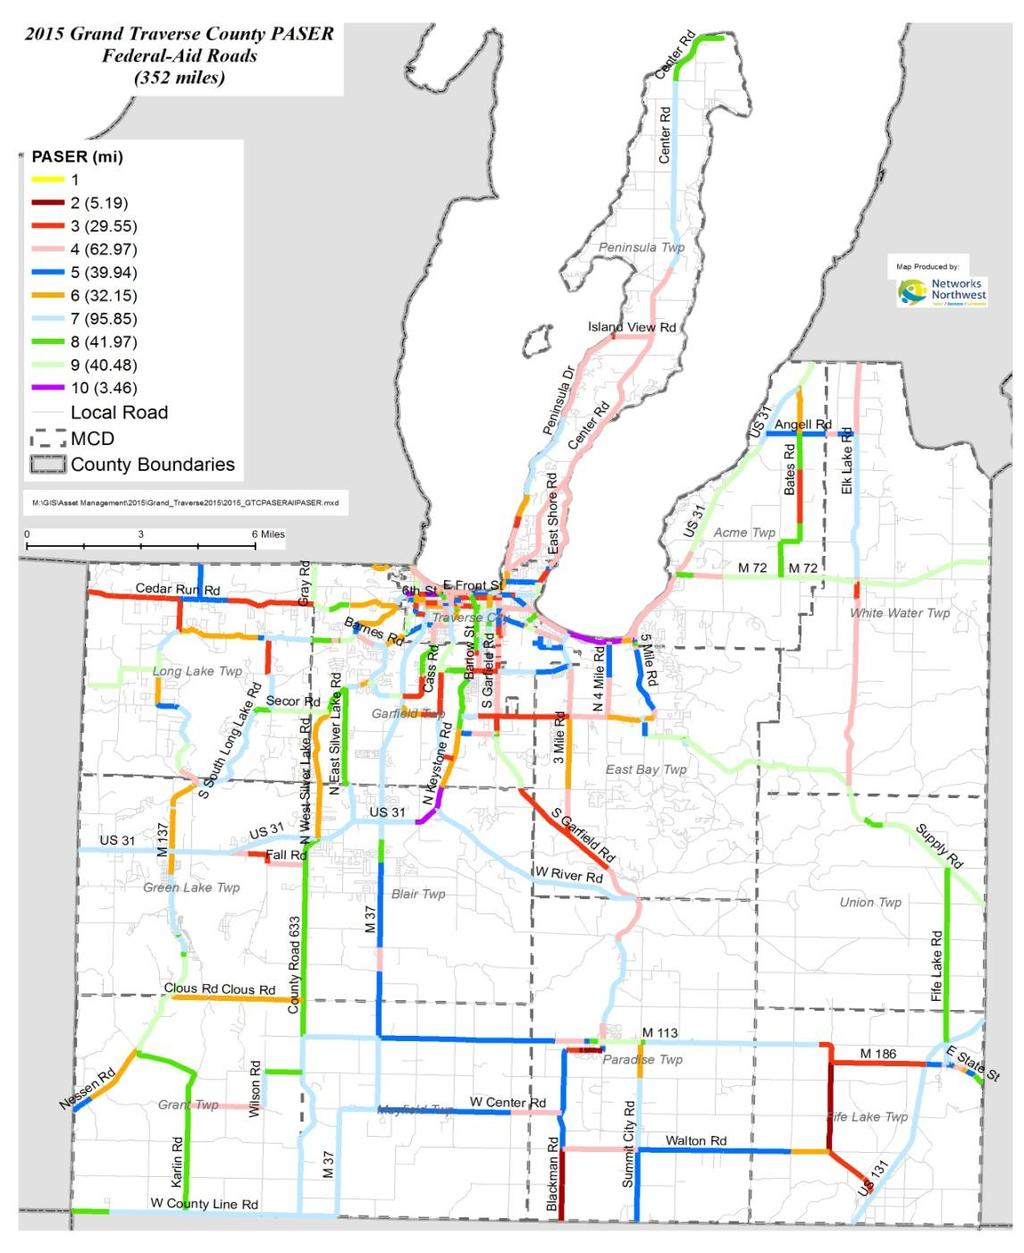 Grand Traverse County Data was collected on approximately 336 miles of federal-aid roads in Grand Traverse County from June 2-3.